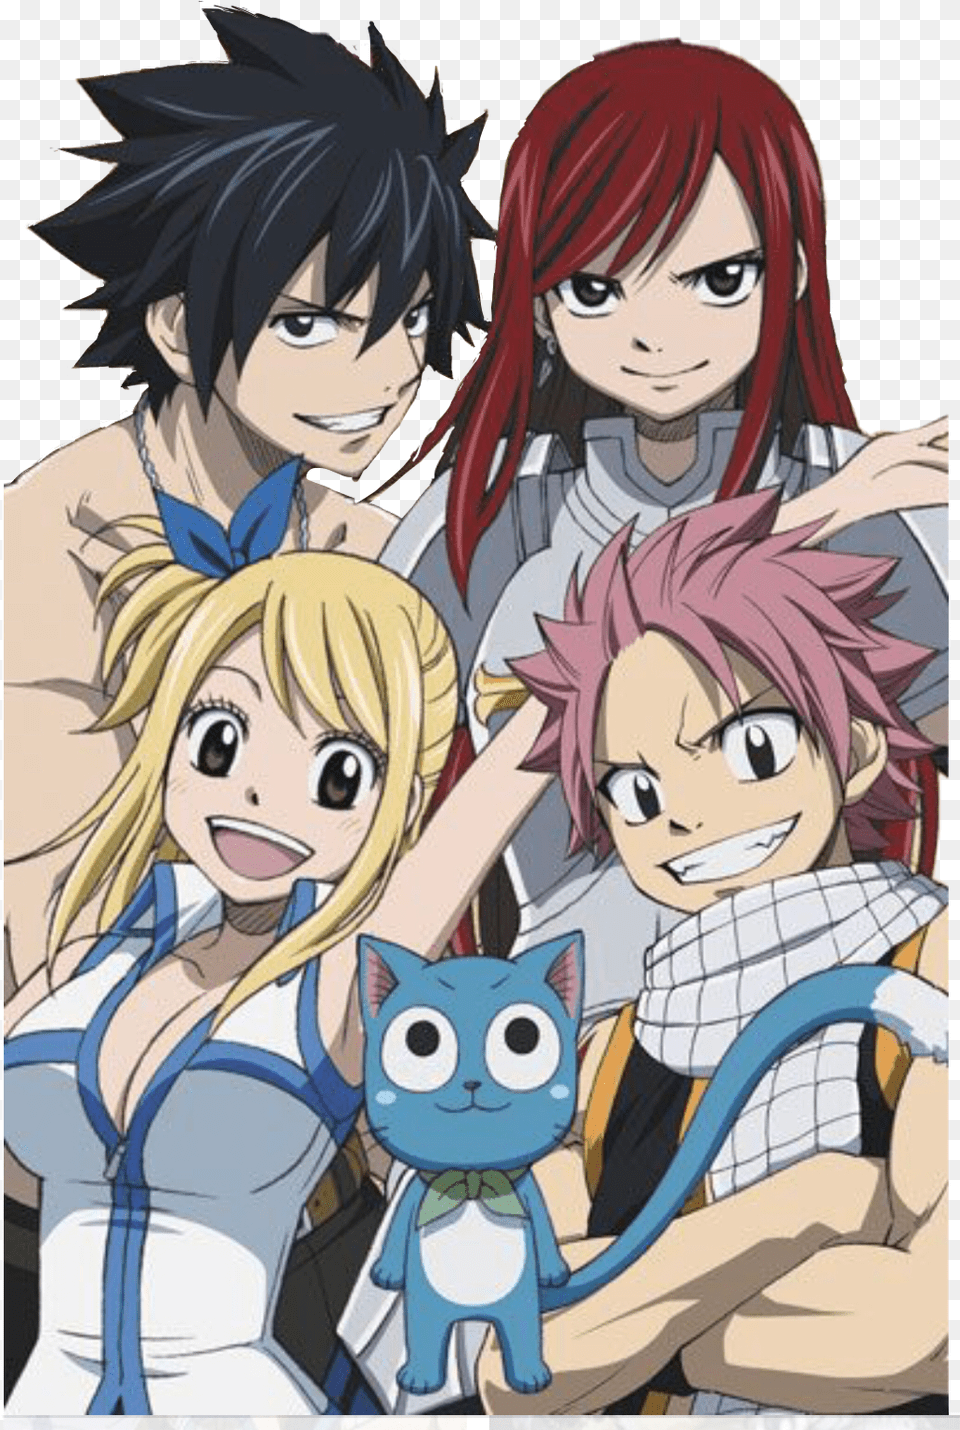 Fairytail Natsu Lucy Happy Gray Erza Freetoedit Fairy Tail Natsu Lucy Gray Erza, Publication, Book, Comics, Person Png